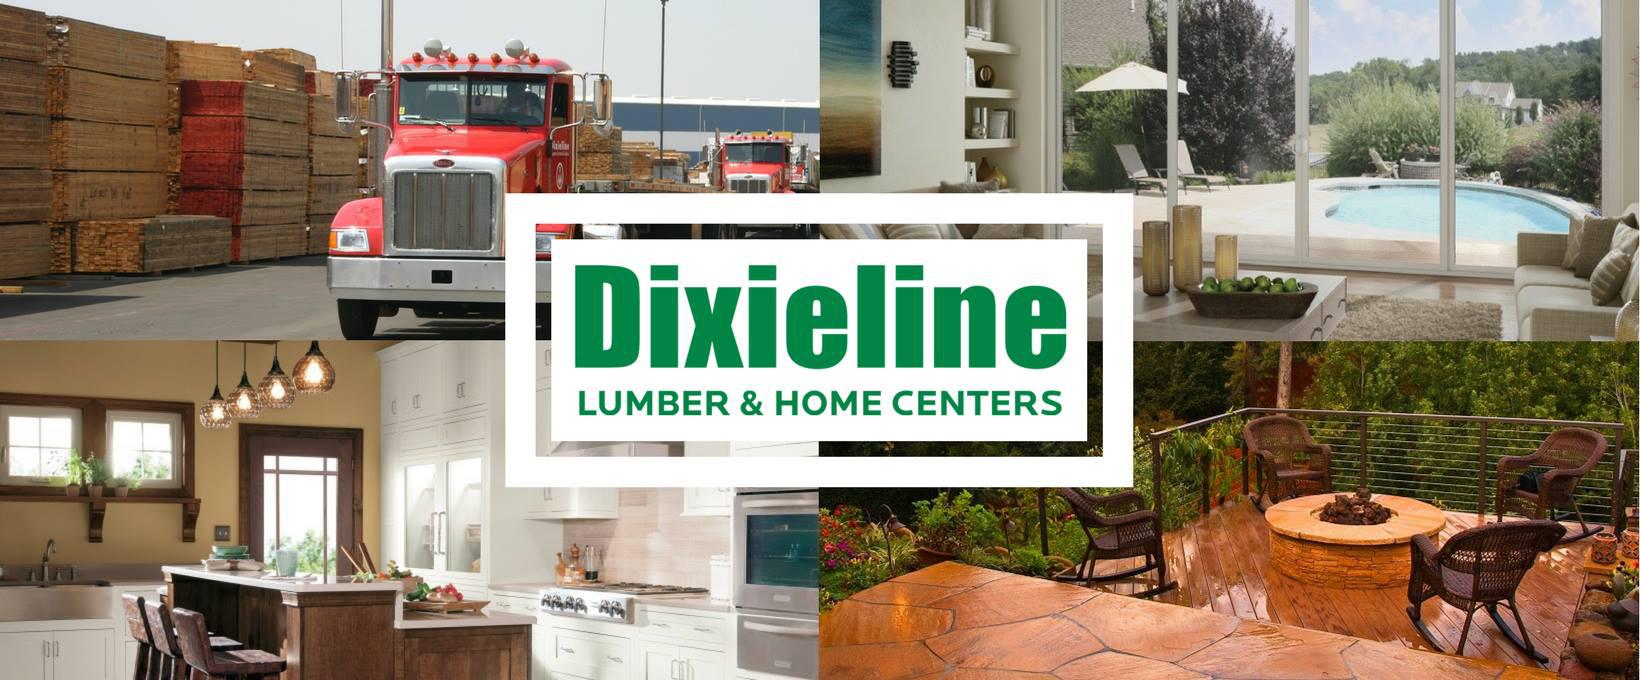 Dixieline Lumber Home Centers 3250 Sports Arena Blvd San Diego Ca Hardware Stores Mapquest